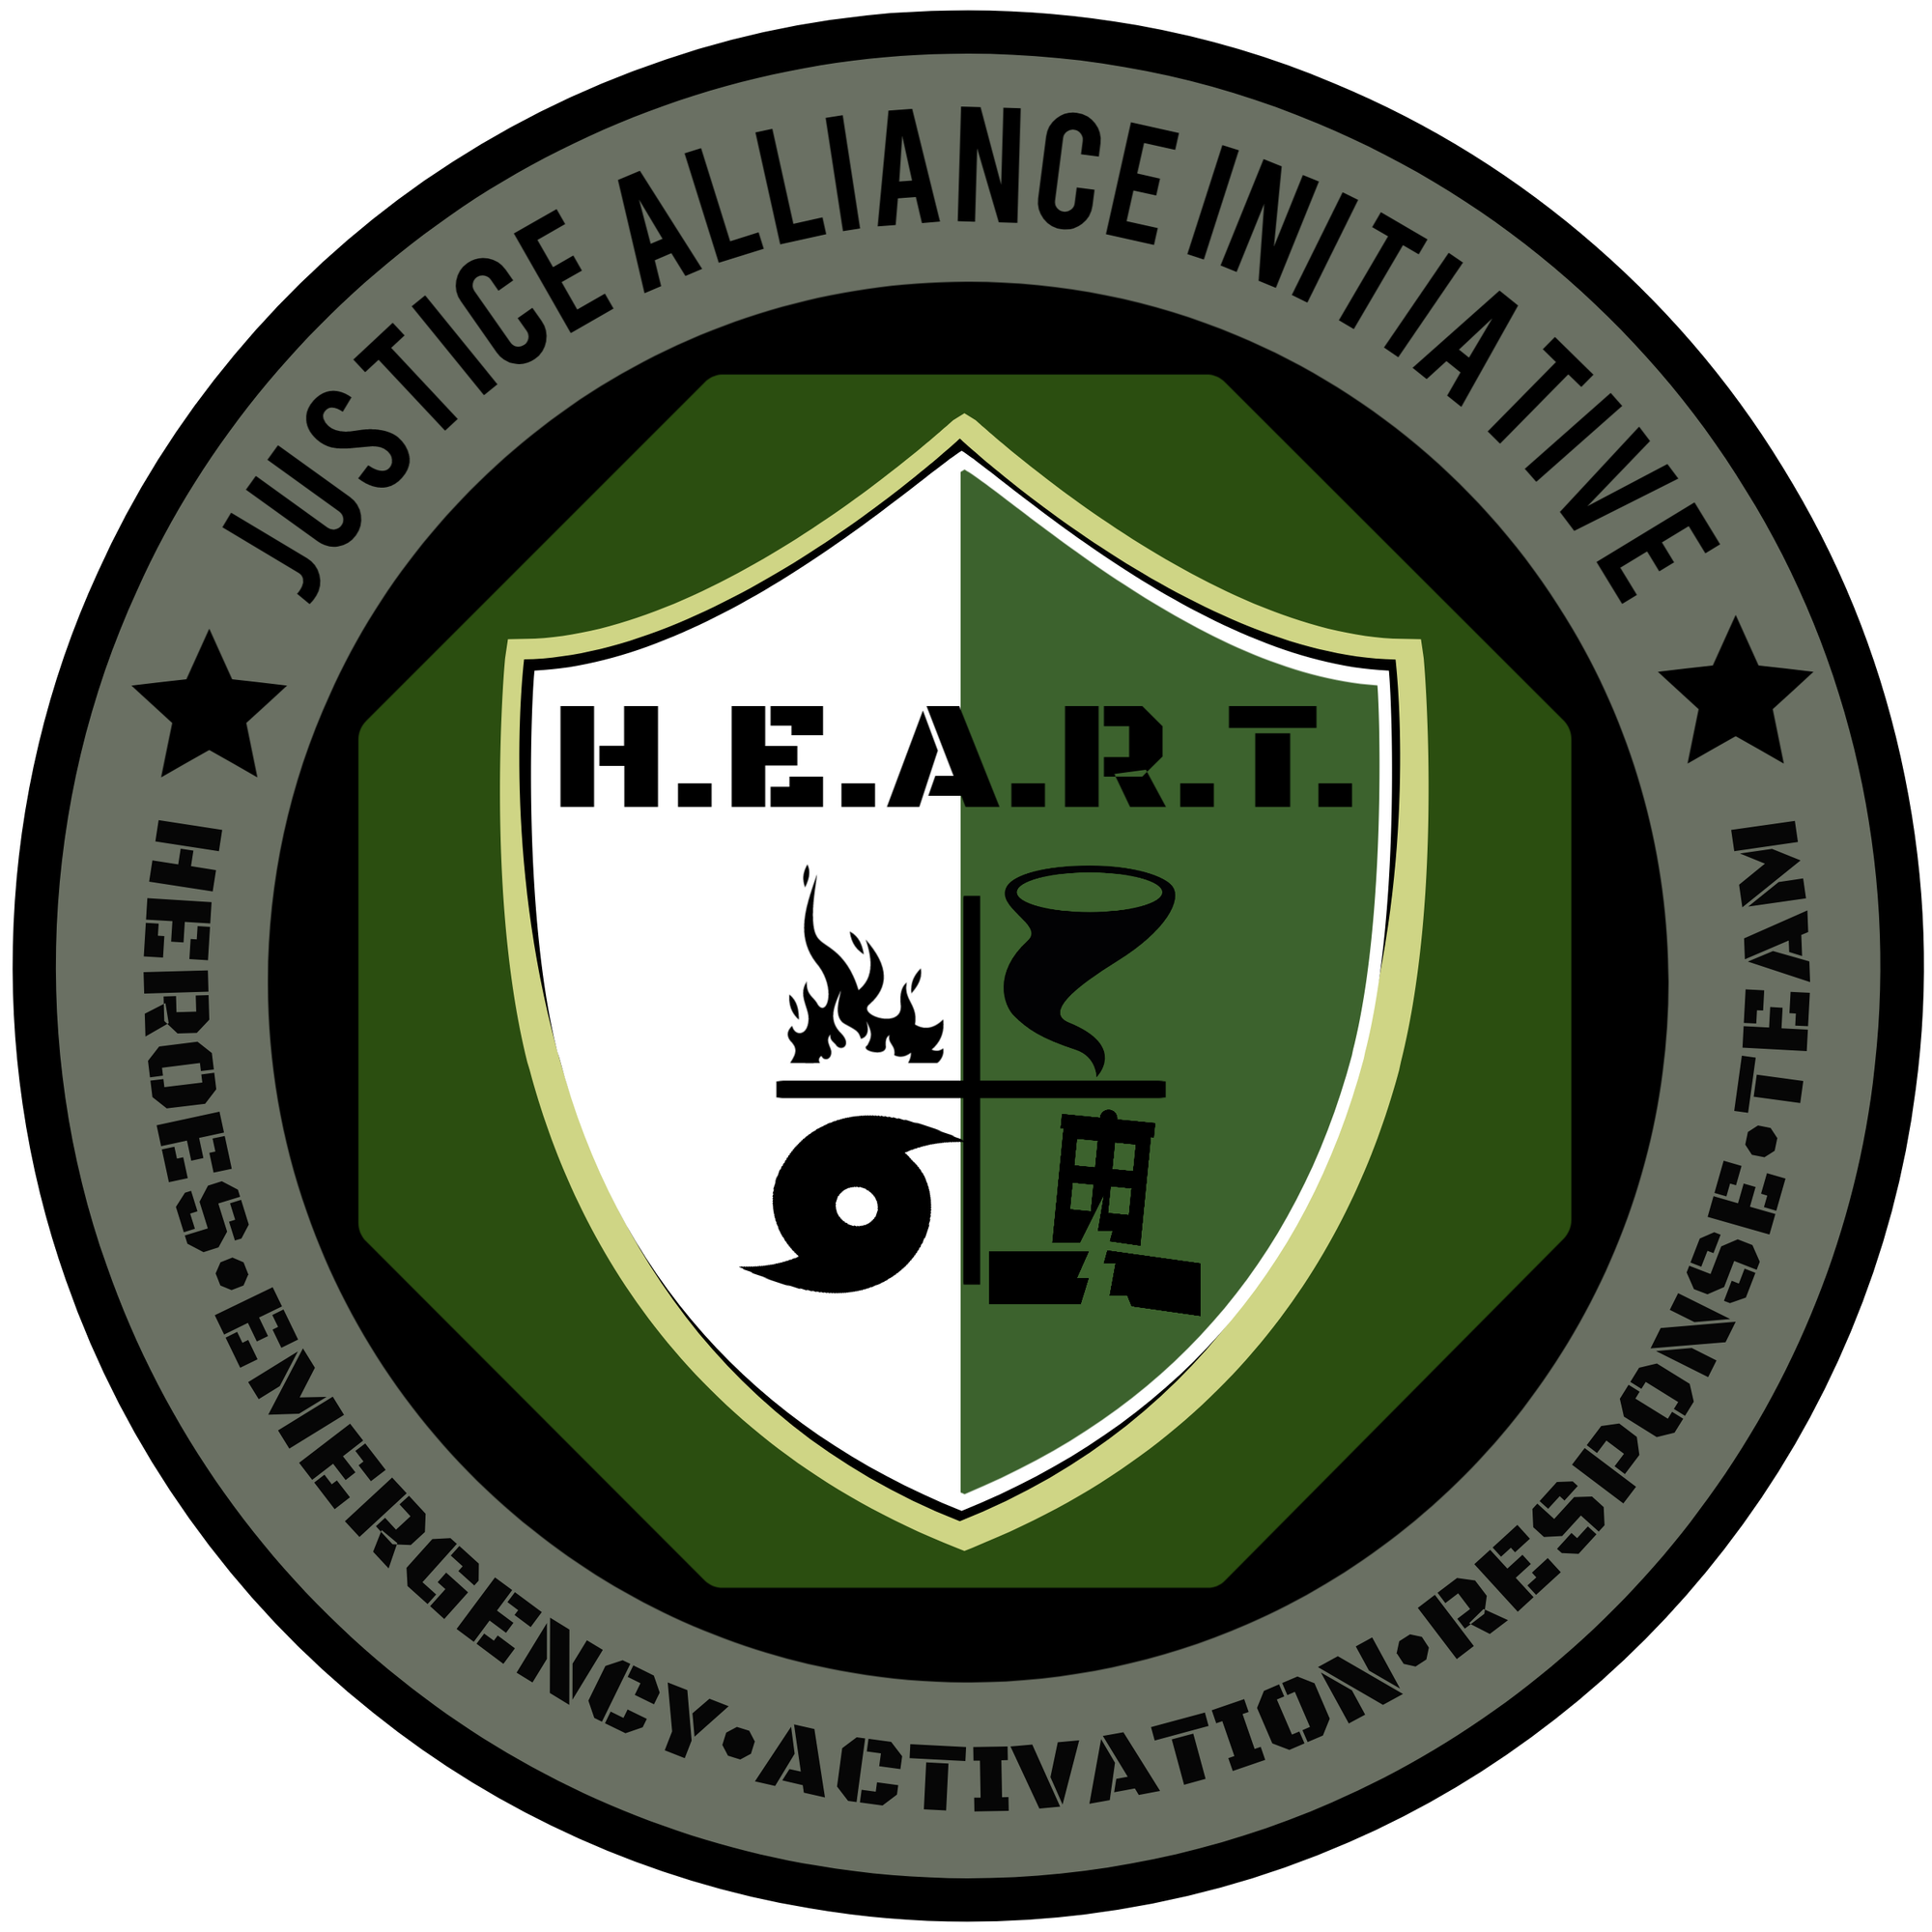 HEROES EMERGENCY ACTIVATION RESPONSE TEAM (H.E.A.R.T.)